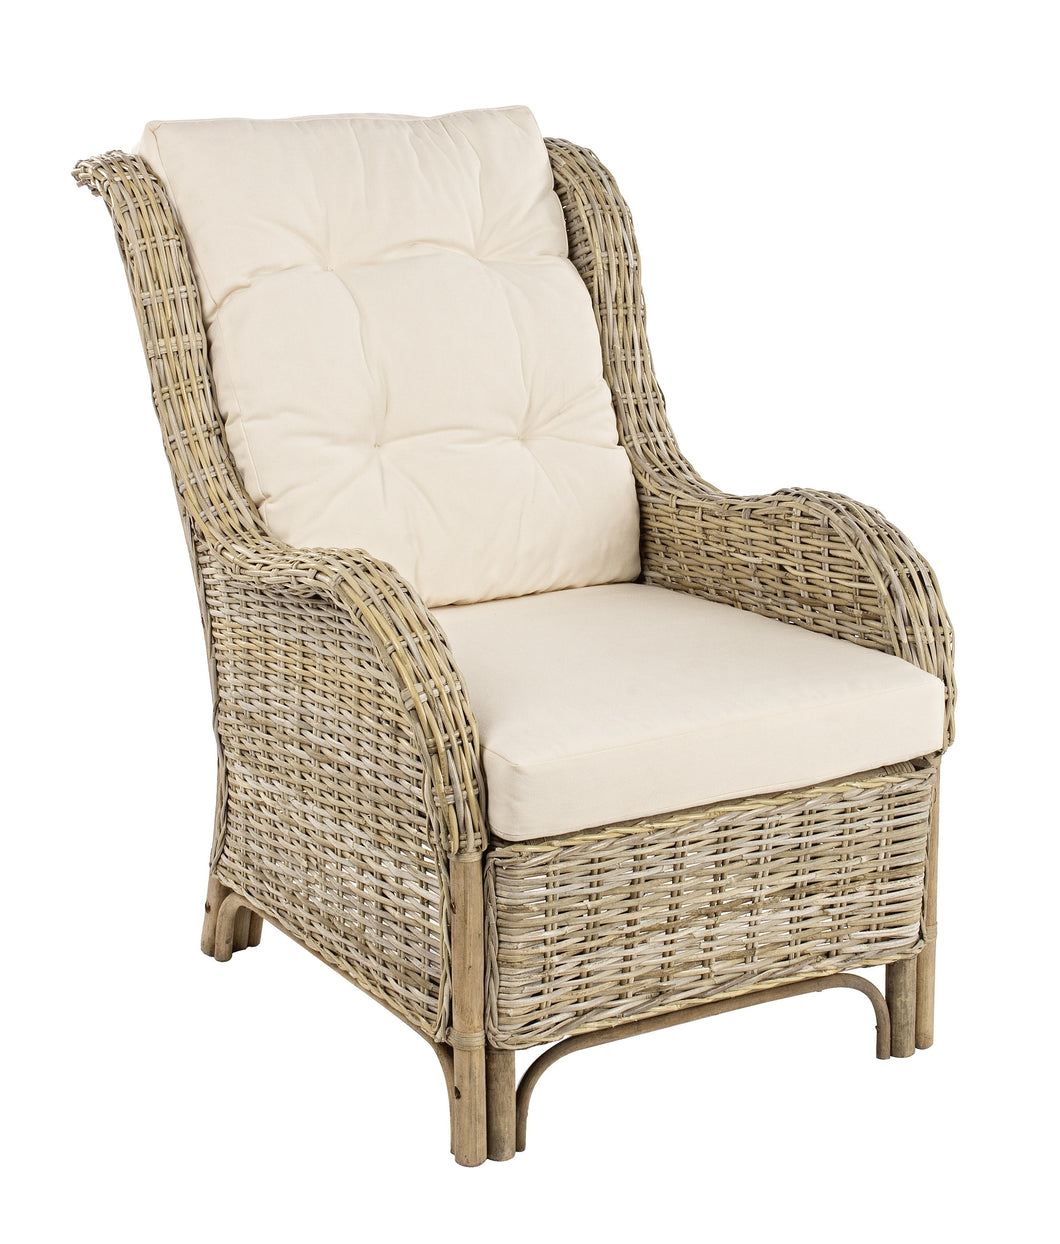 Orlando Store™ - Relaxing Armchair with Sabine Cushion